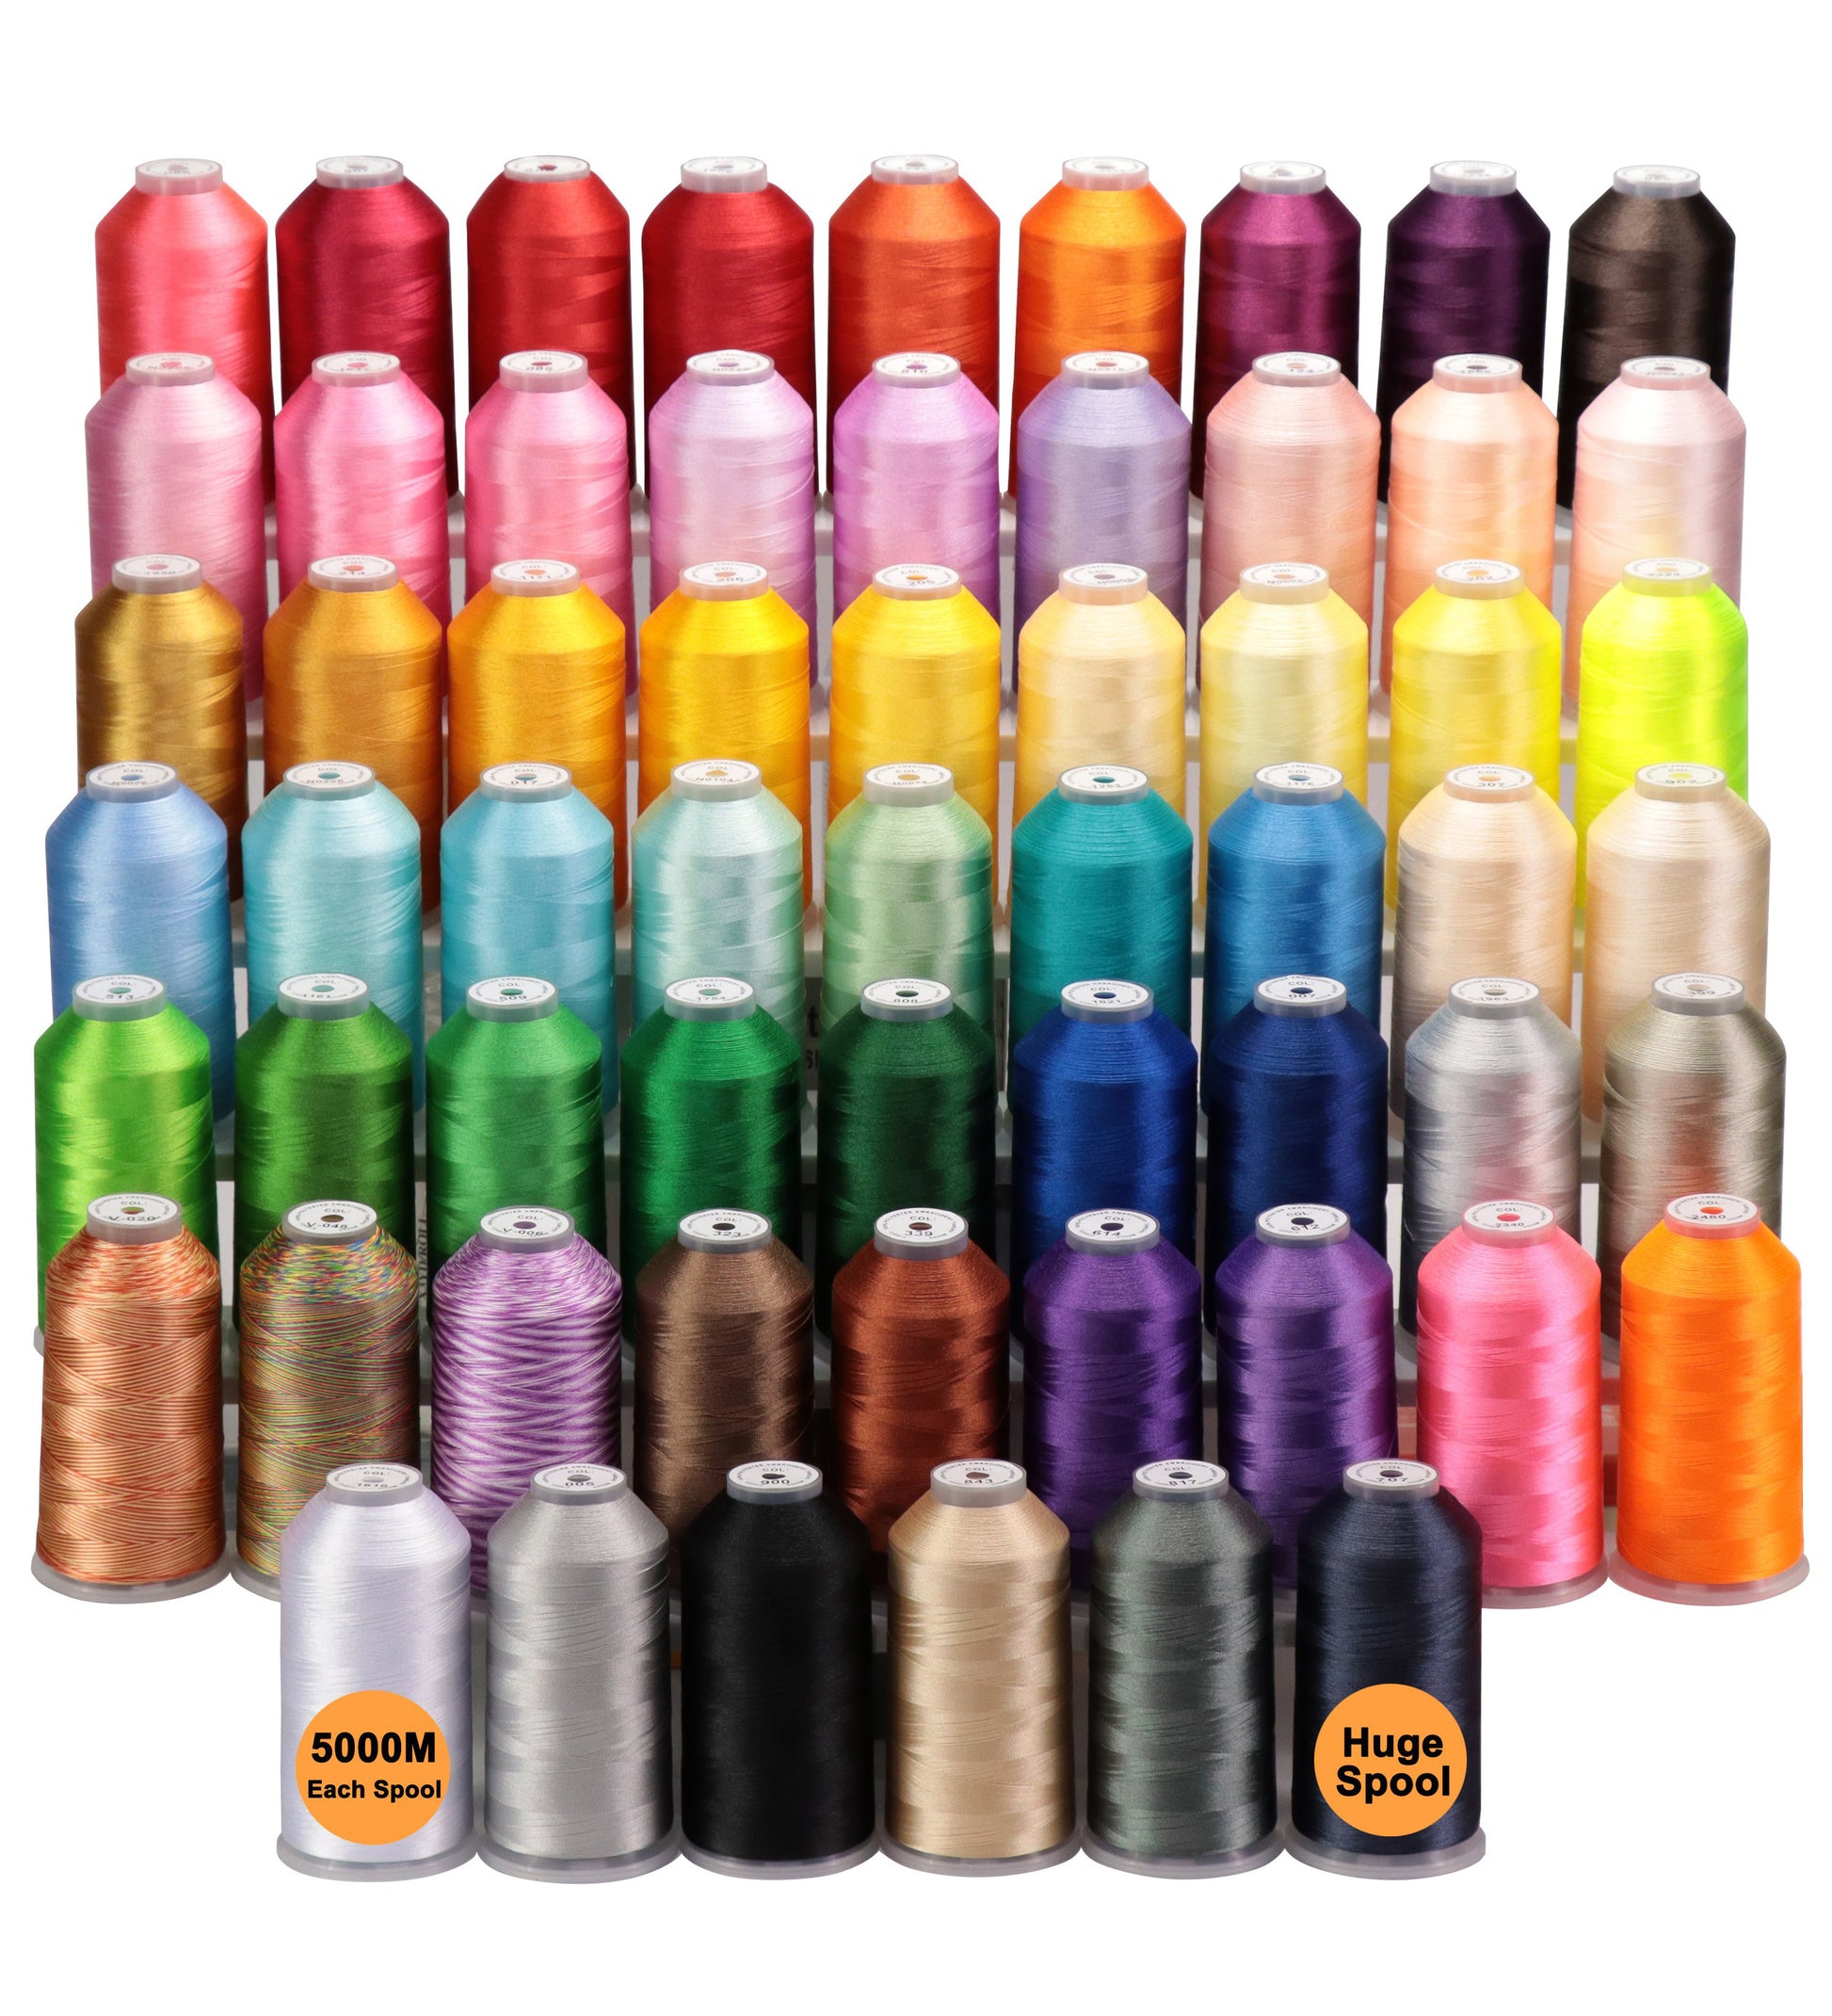  New brothread 21 Assorted Colors Metallic Embroidery